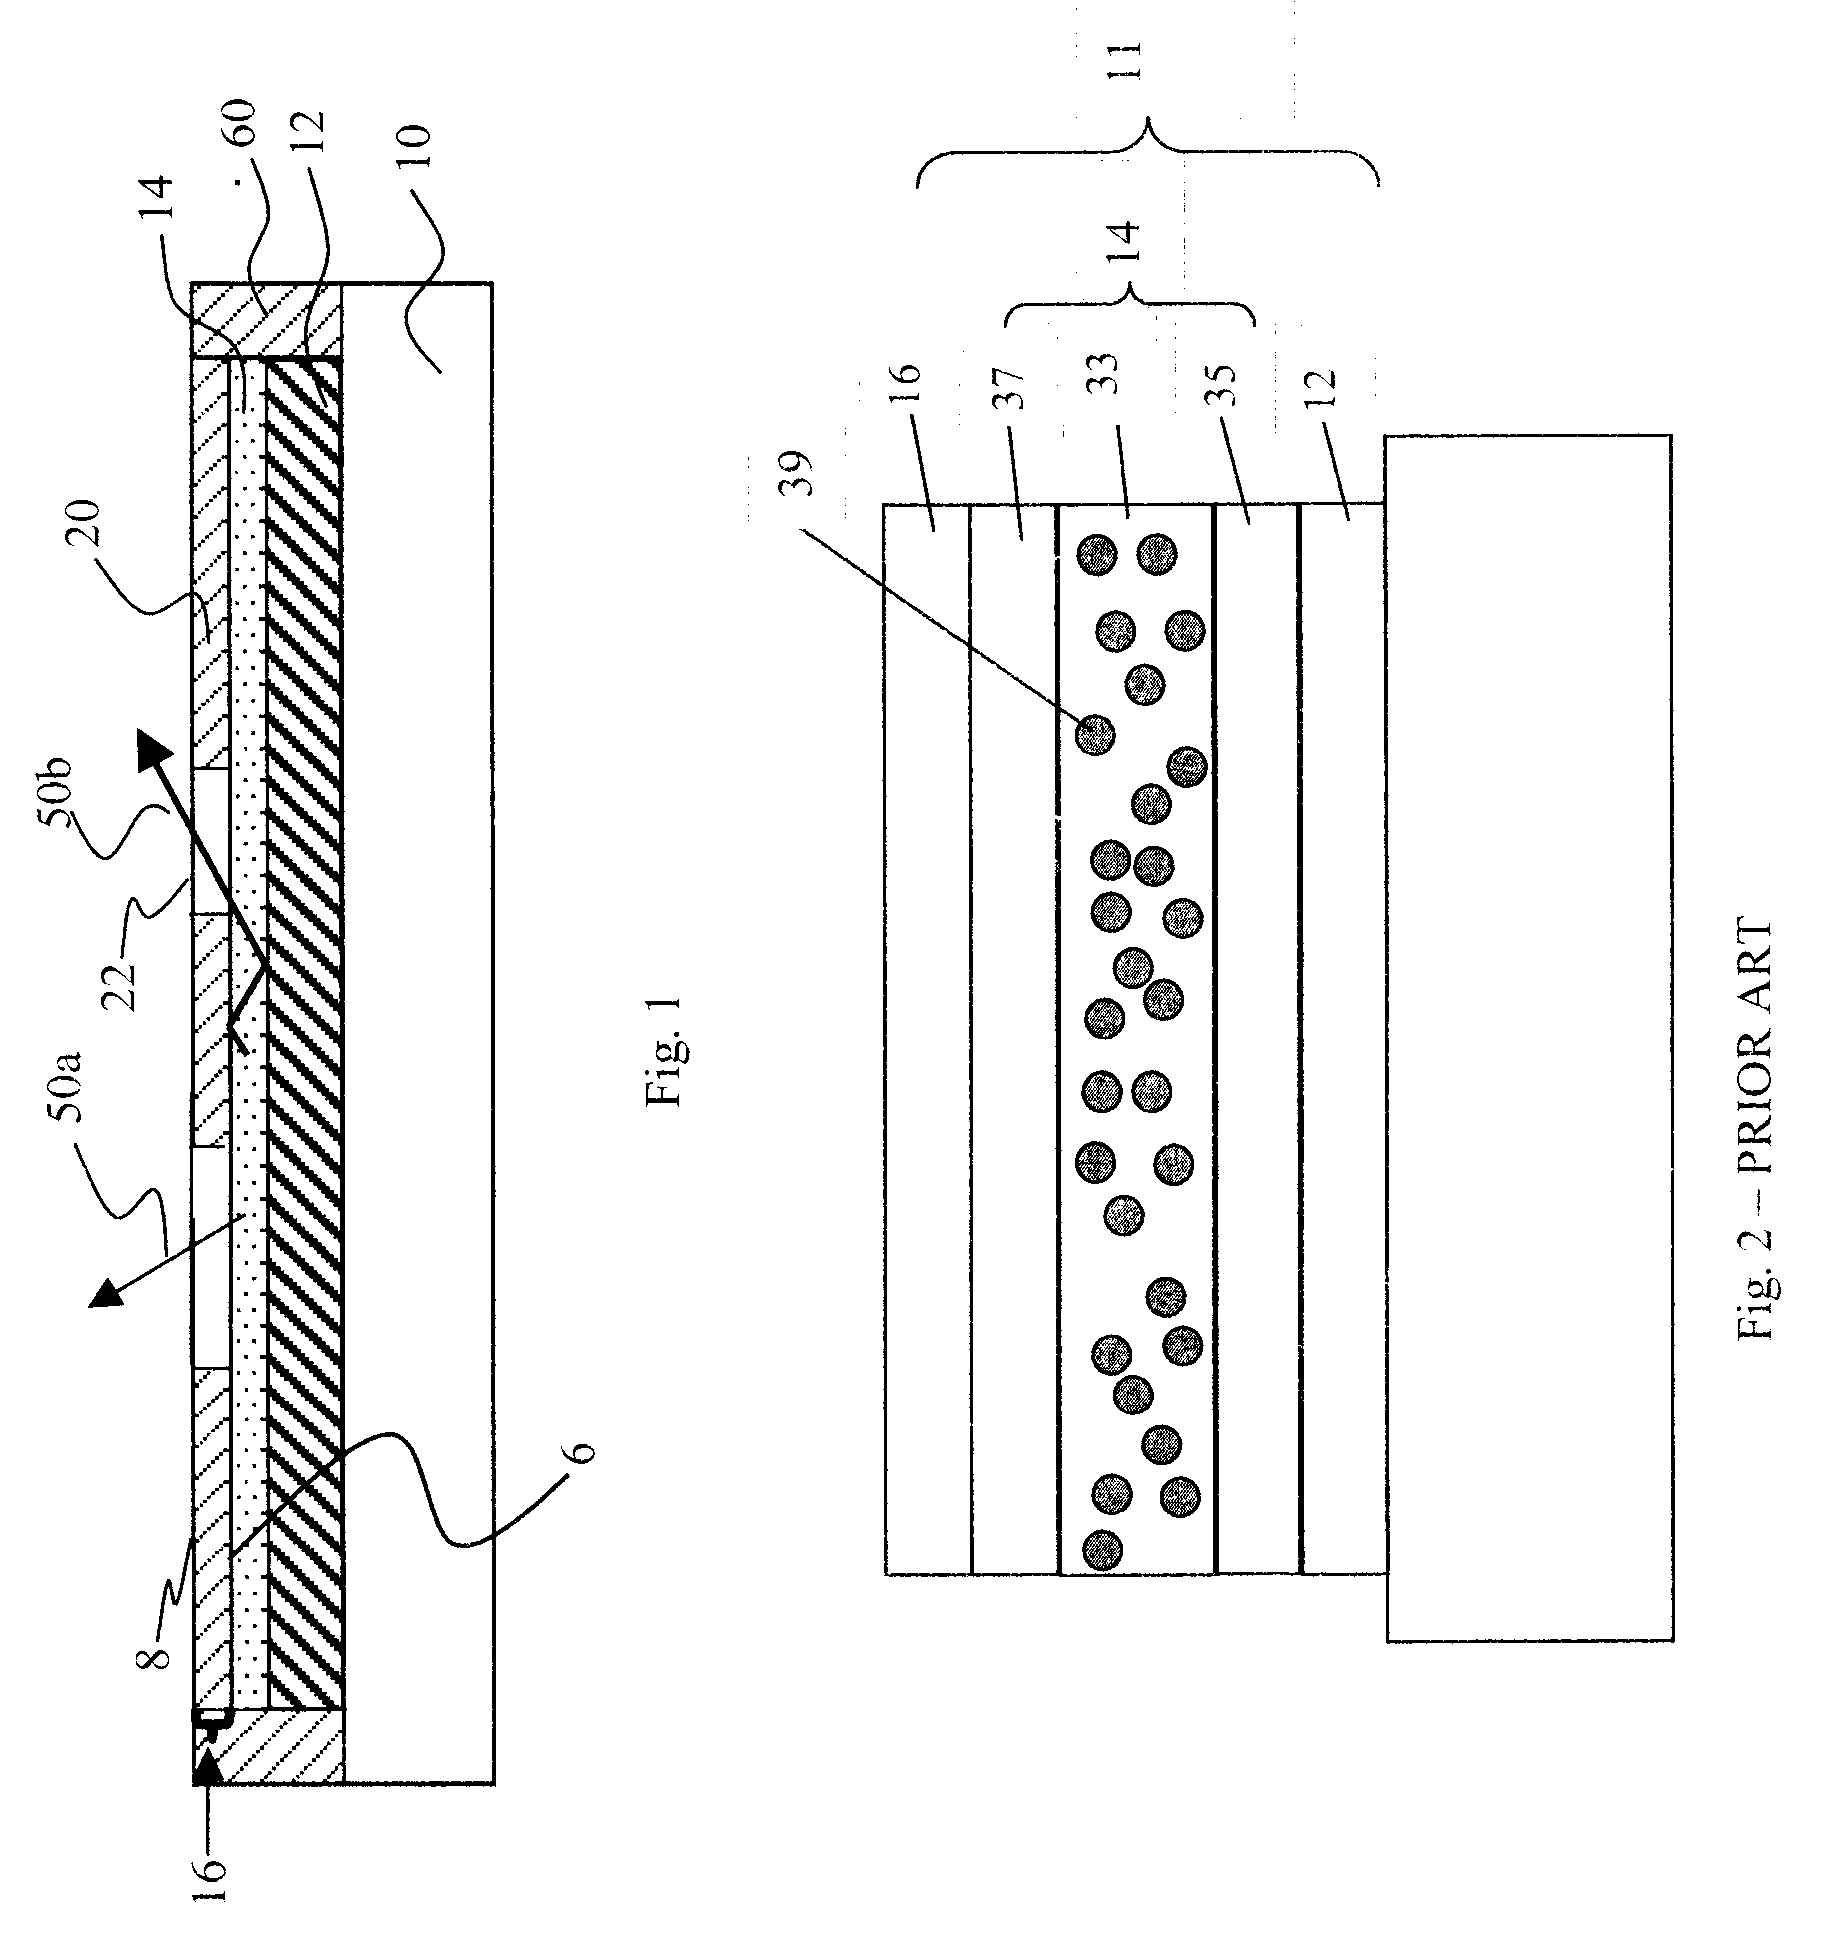 Electroluminescent device having improved power distribution